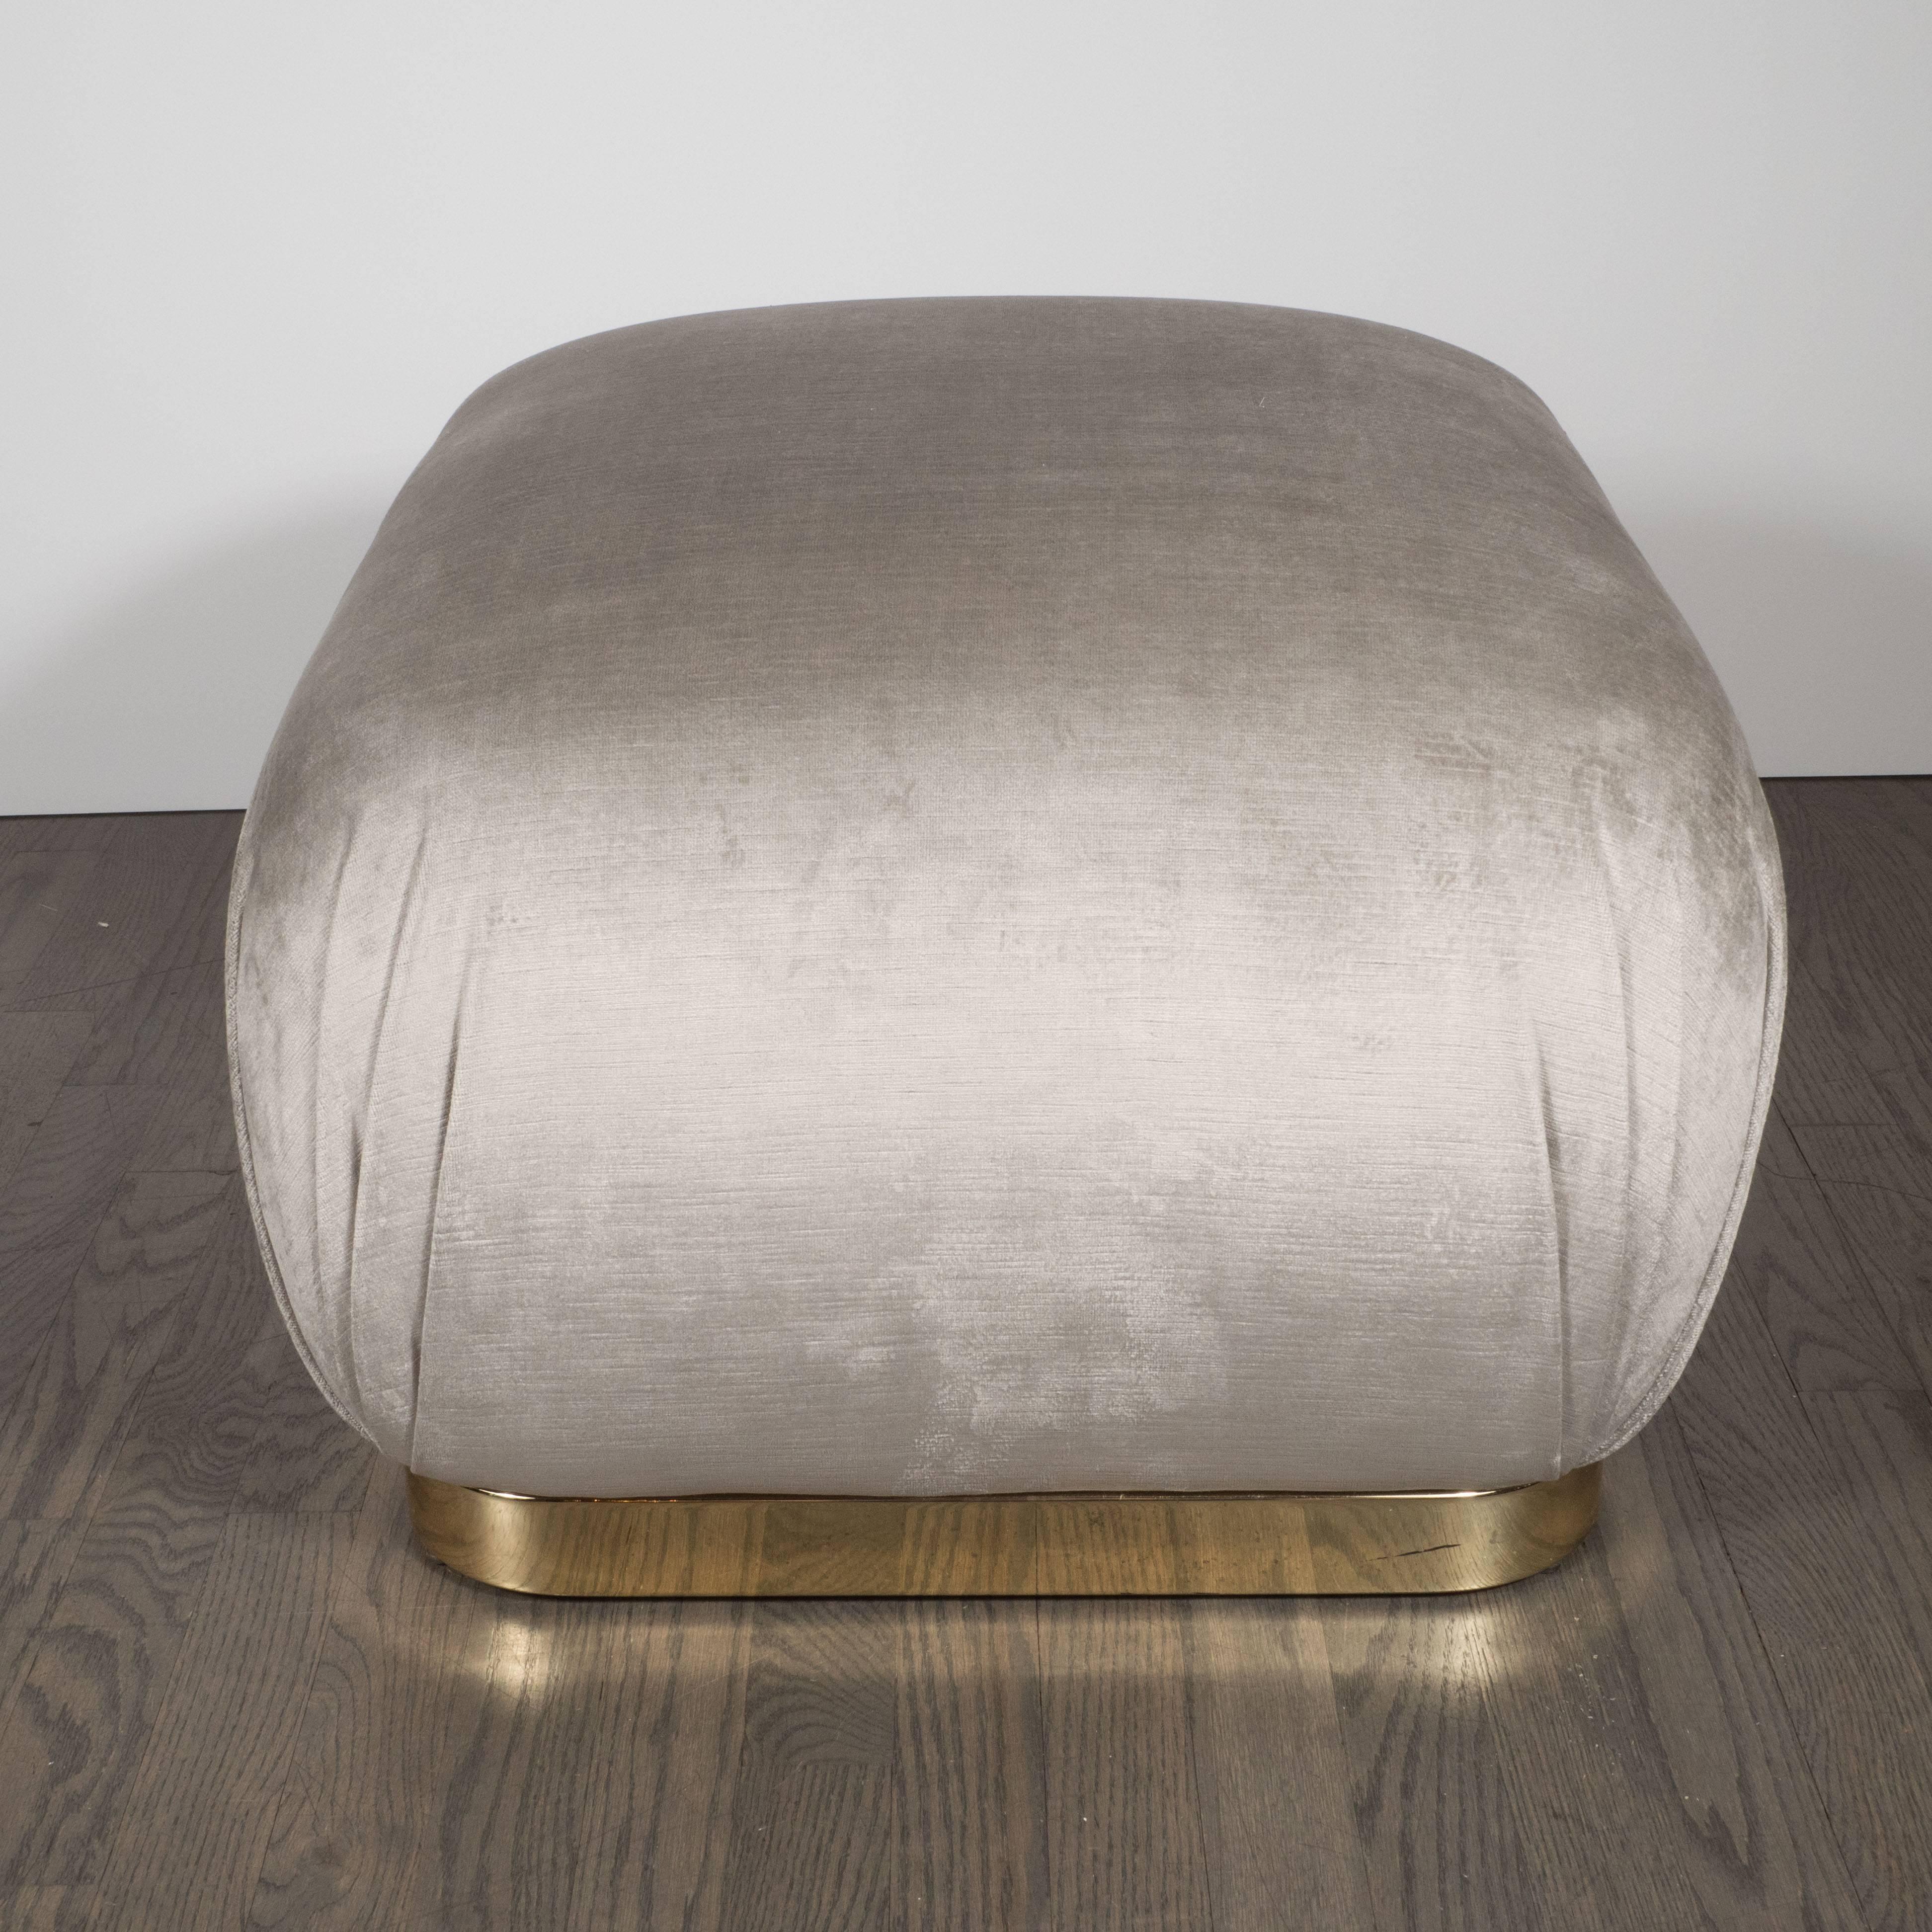 These sophisticated Mid-Century Modernist soufflé poufs, realized in the manner of Karl Springer, feature a lustrous square brass bases with rounded edges and platinum velvet upholstery. With their austere lines and luxe materials, these pieces